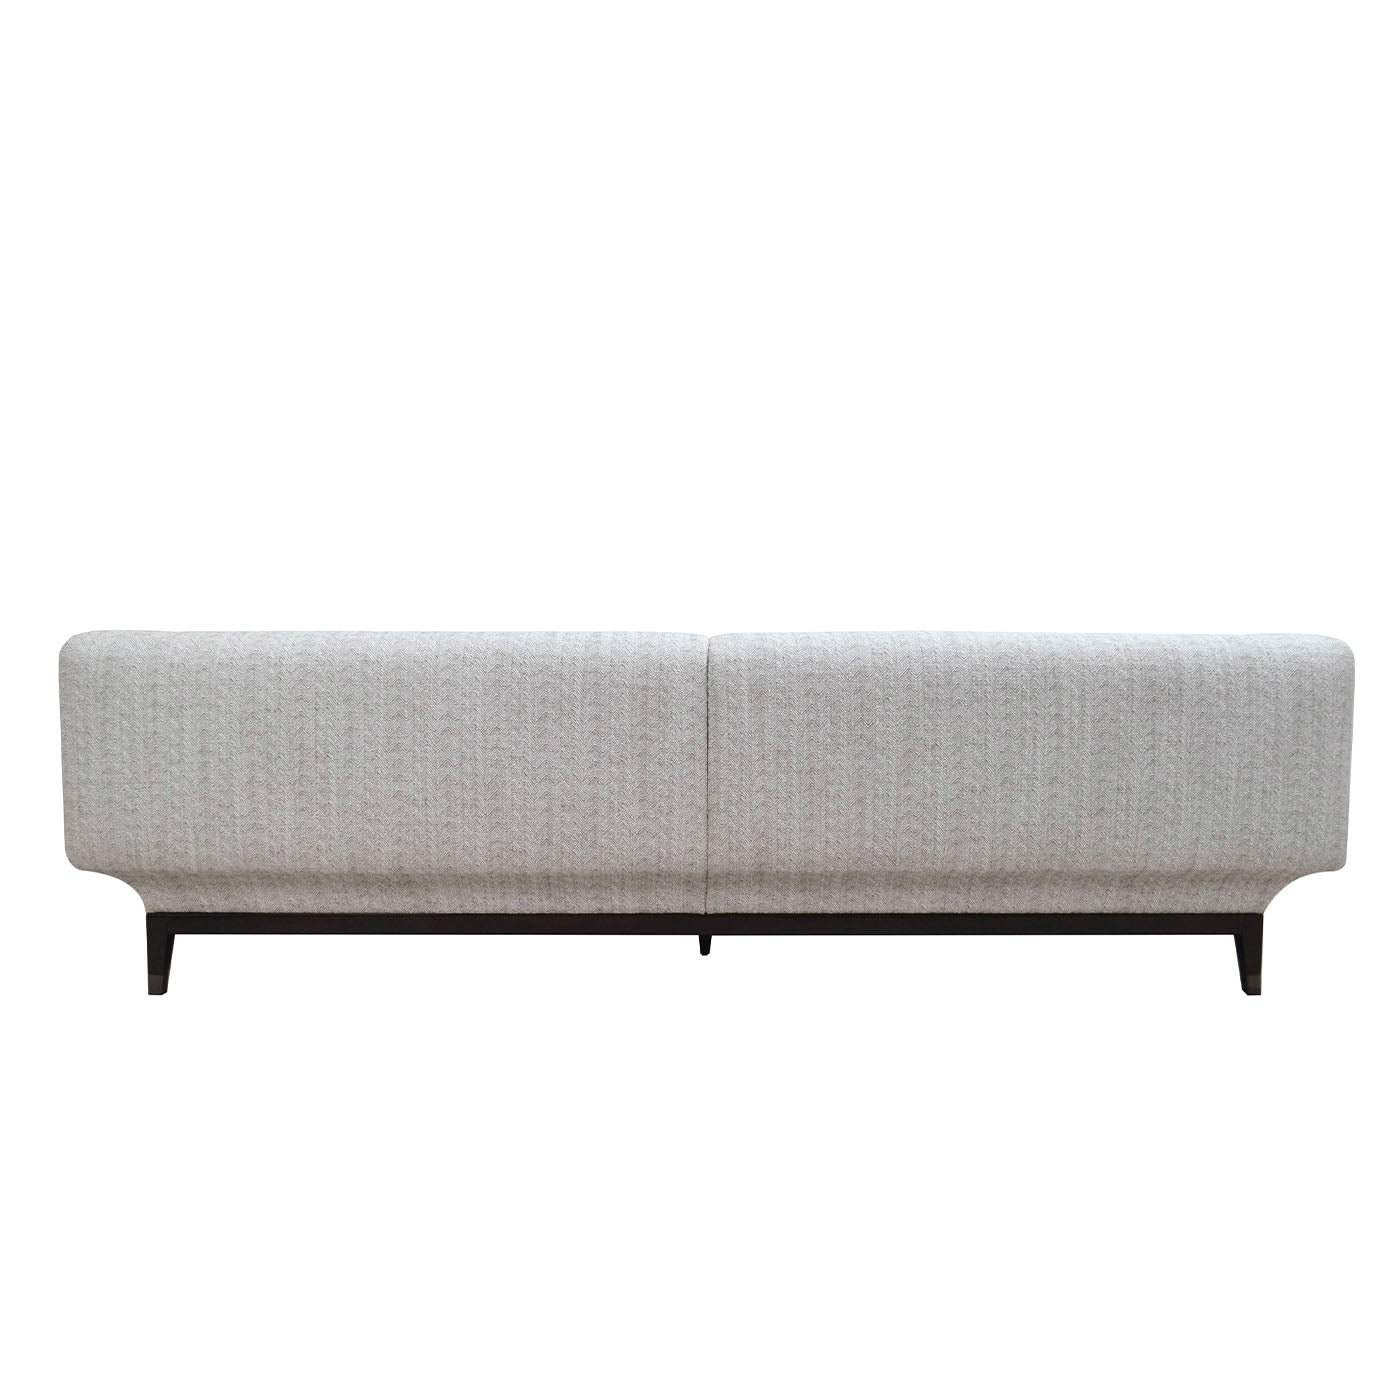 Italian Ivory Sofa 240 With Brown Wooden Base - Alternative view 3